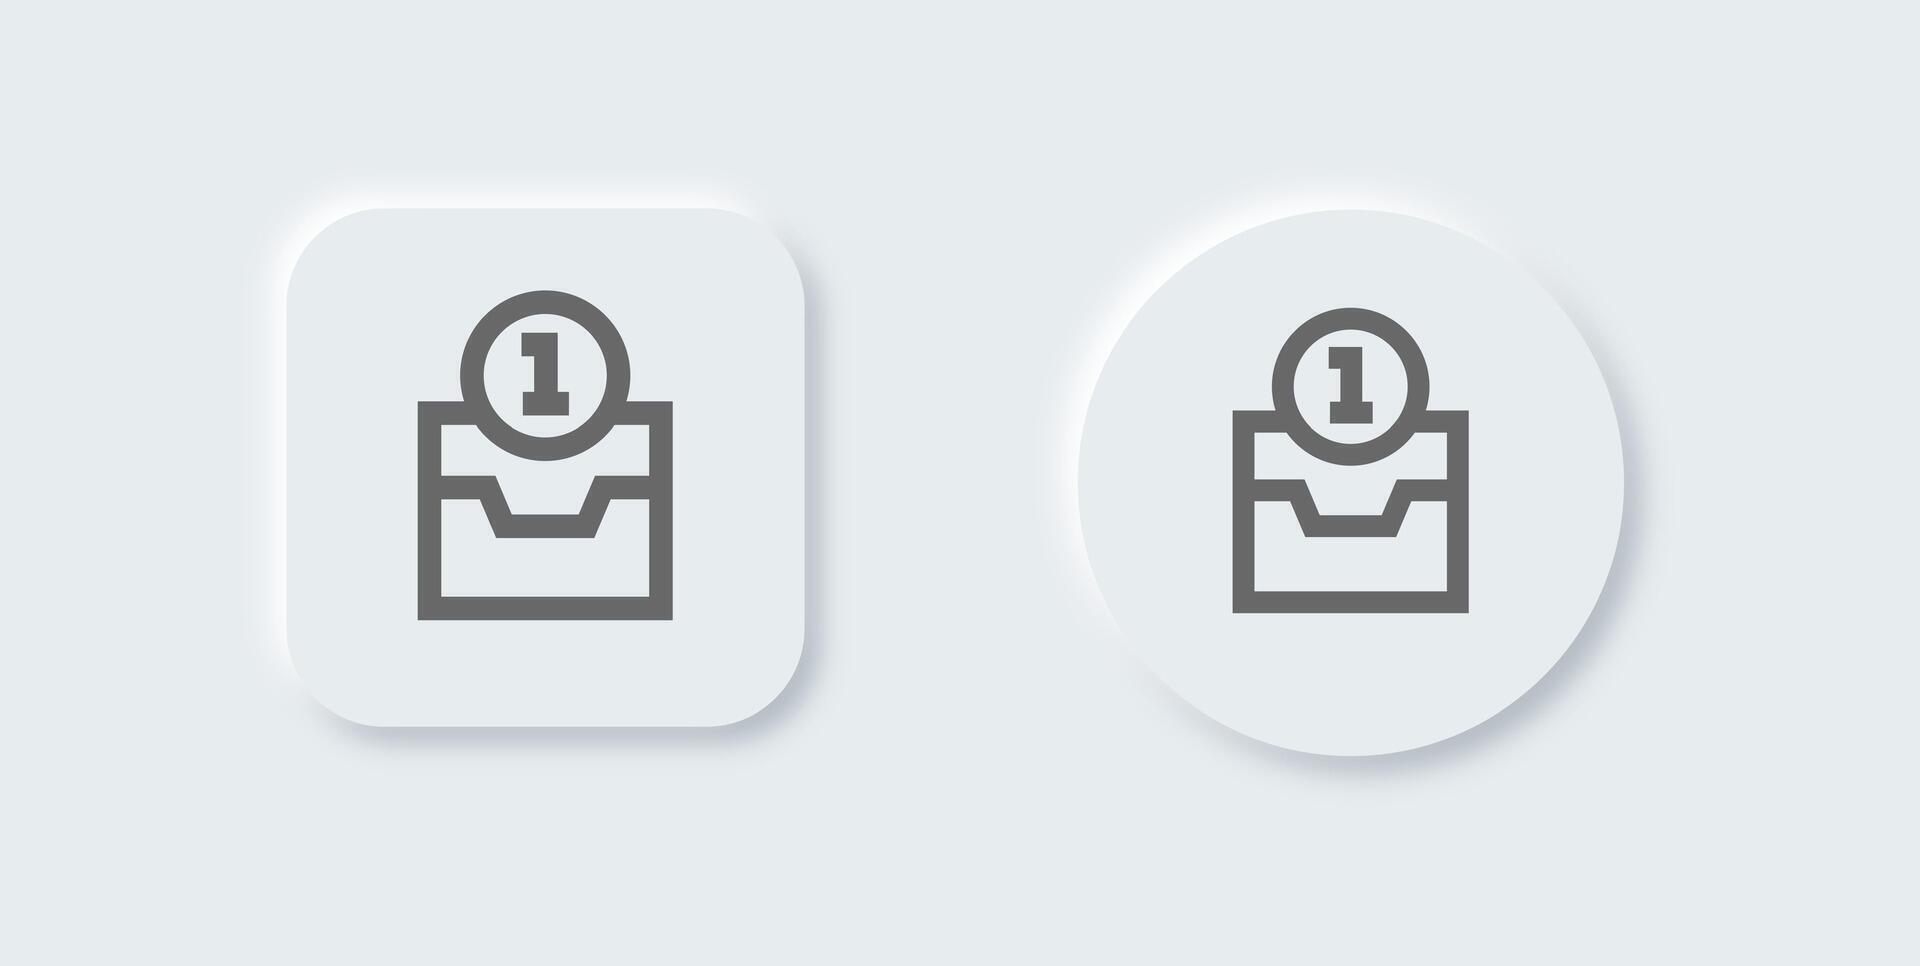 Direct message line icon in neomorphic design style. Inbox signs vector illustration.